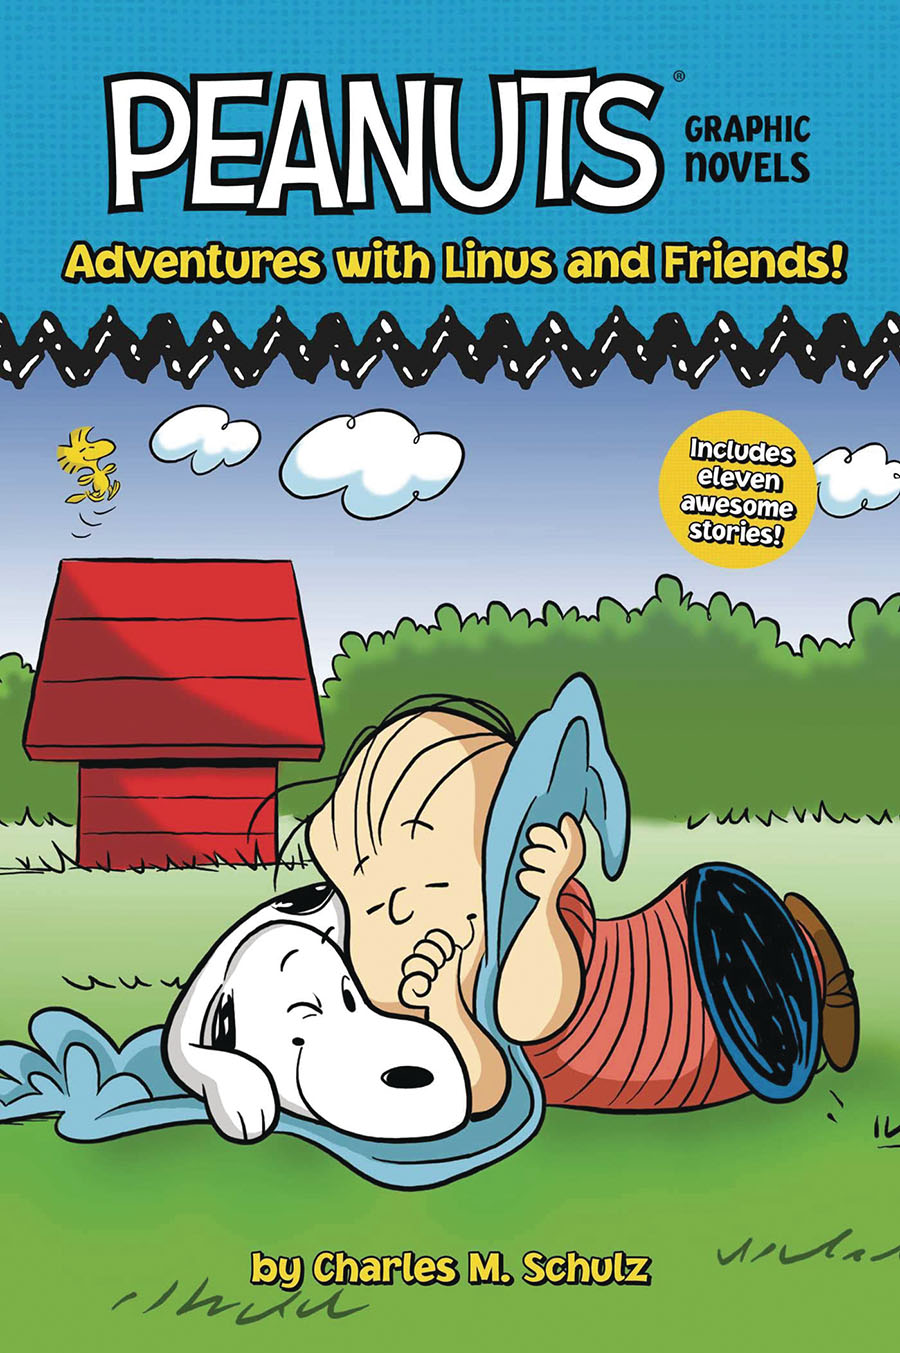 Peanuts Graphic Novels Adventures With Linus And Friends TP